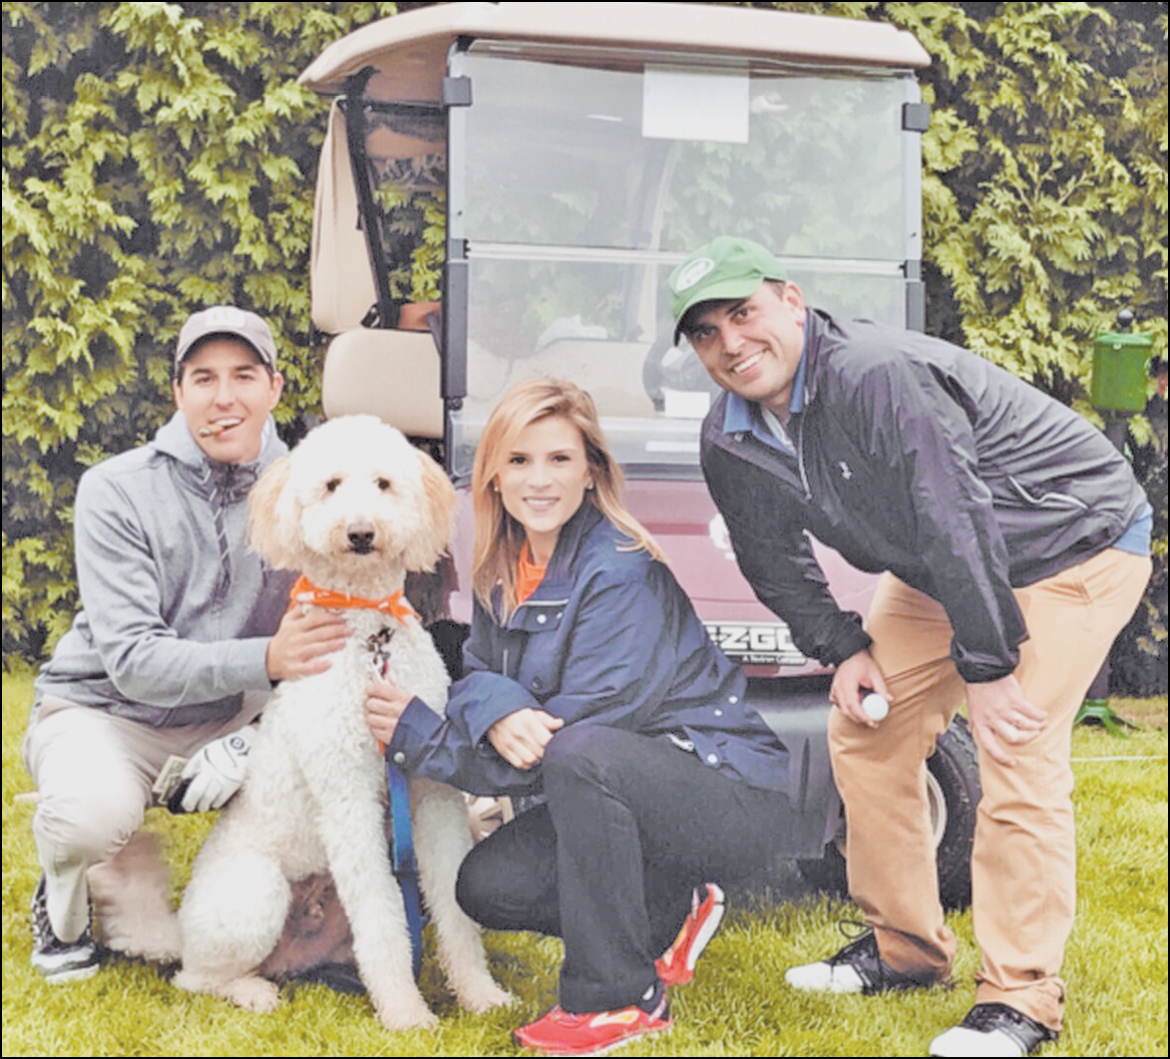 Kelly Kannen, center, is pictured at the Suffield Country Club during the October 1 golf outing supporting her entry to run in the New York Marathon for the ASPCA on November 6. With her are friends Bryce Johnstone, left, and Dan Presser plus ASPCA mascot Cooper Manning.